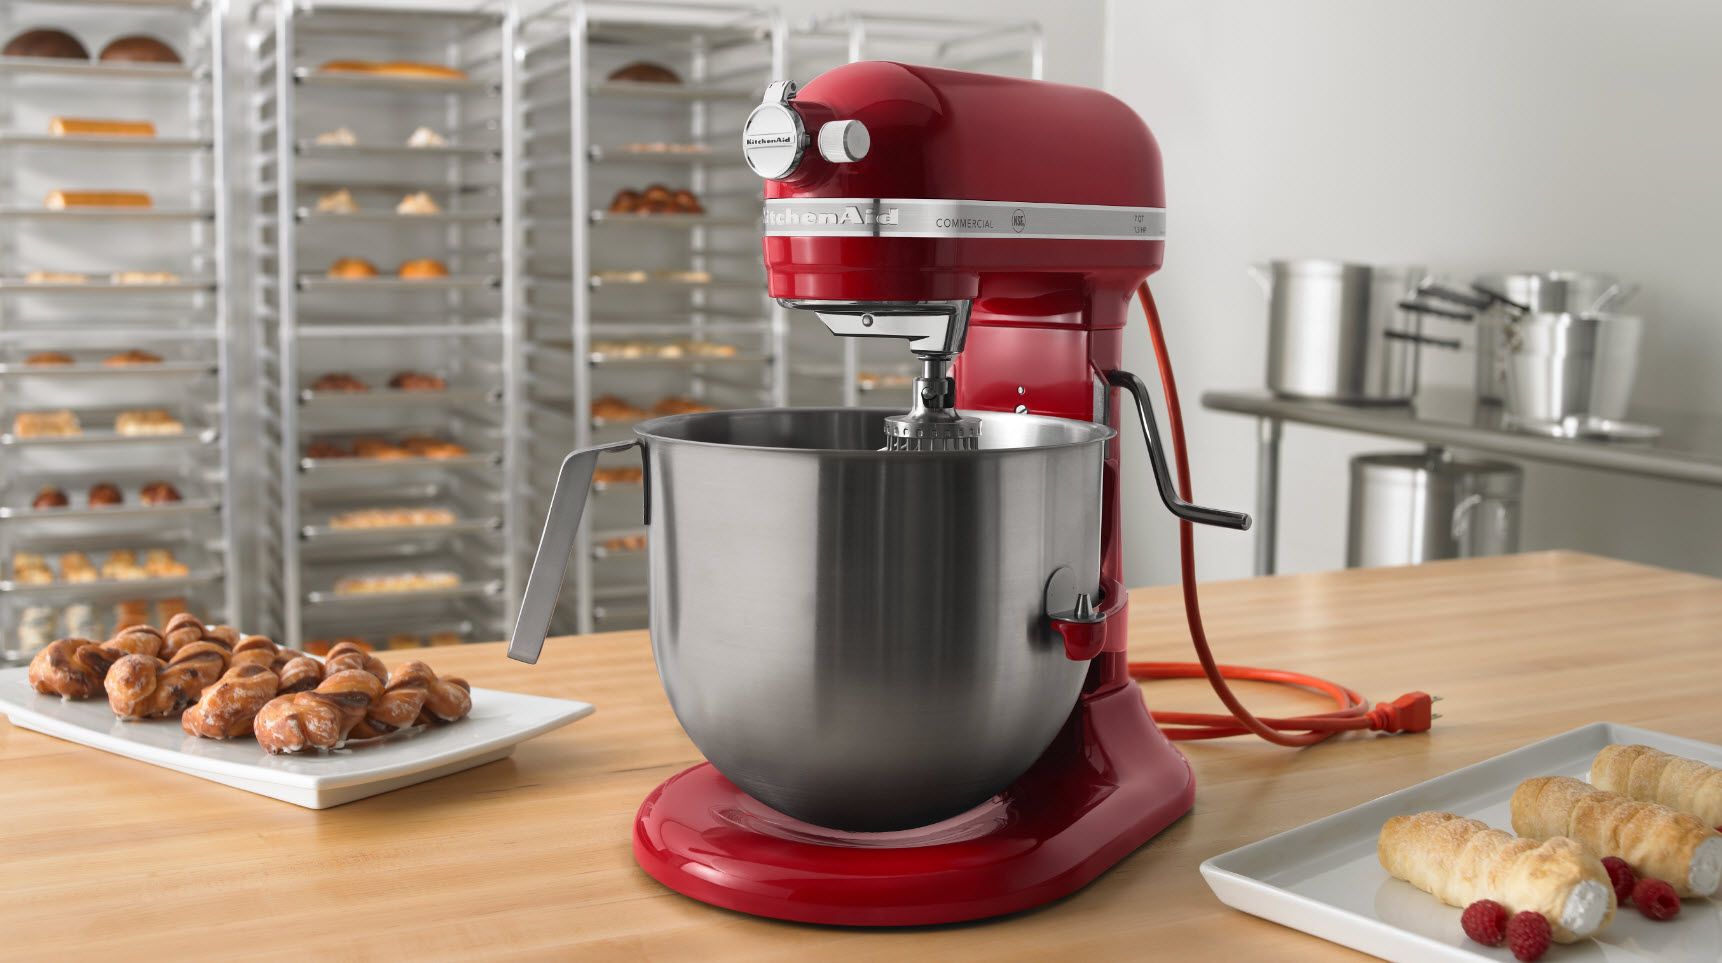 Simplify your kitchen, elevate your cooking. Our Mixer Lift